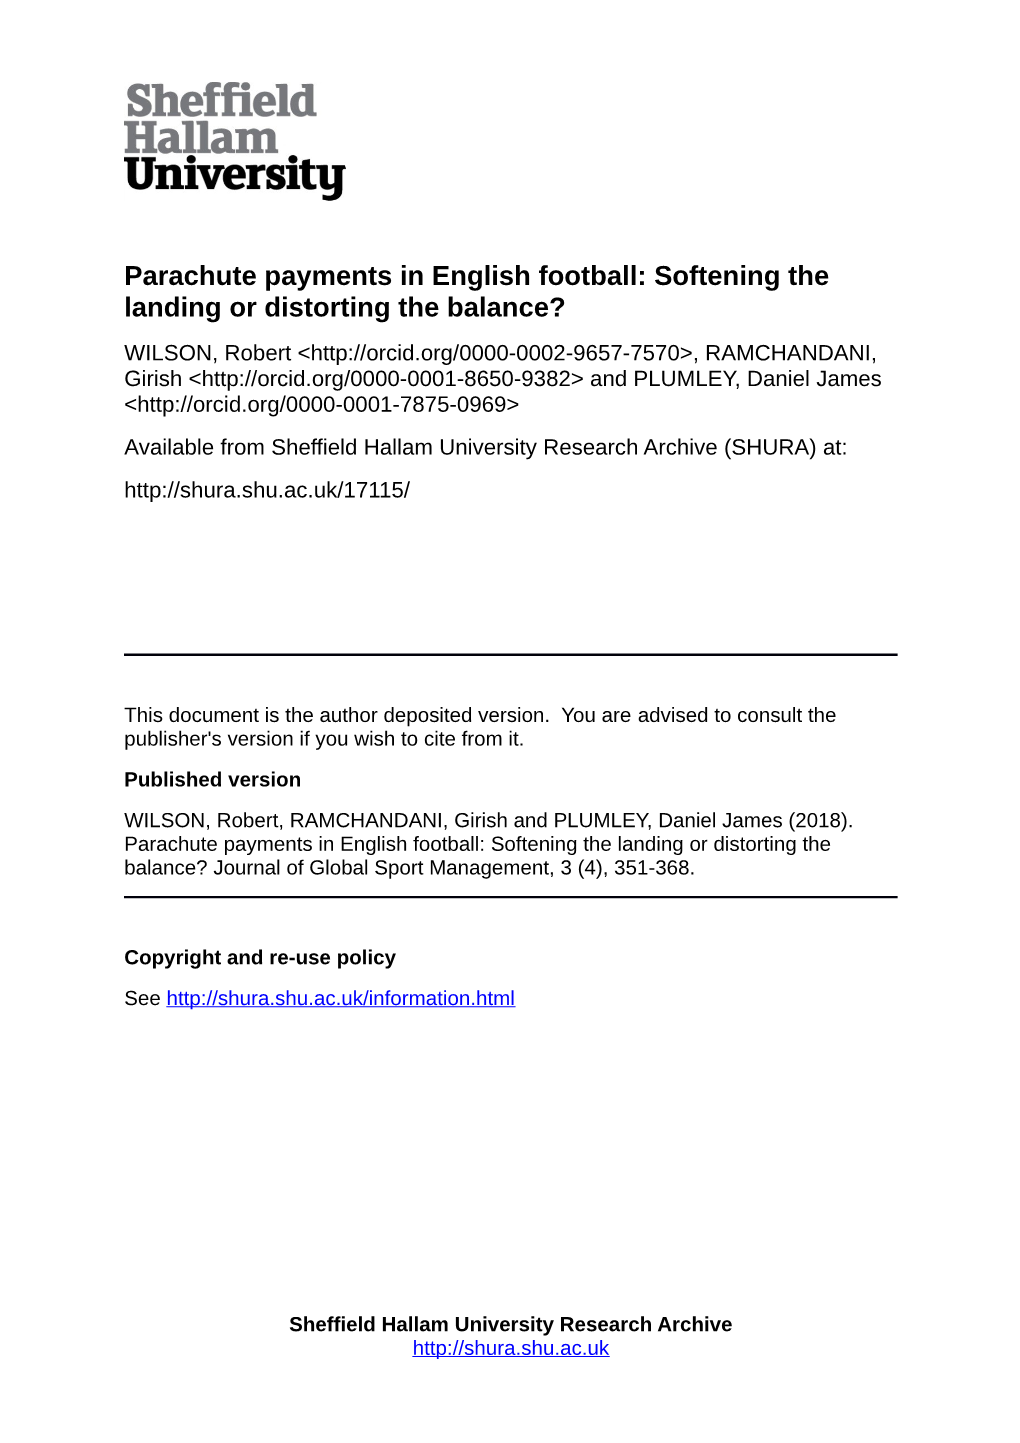 Parachute Payments in English Football